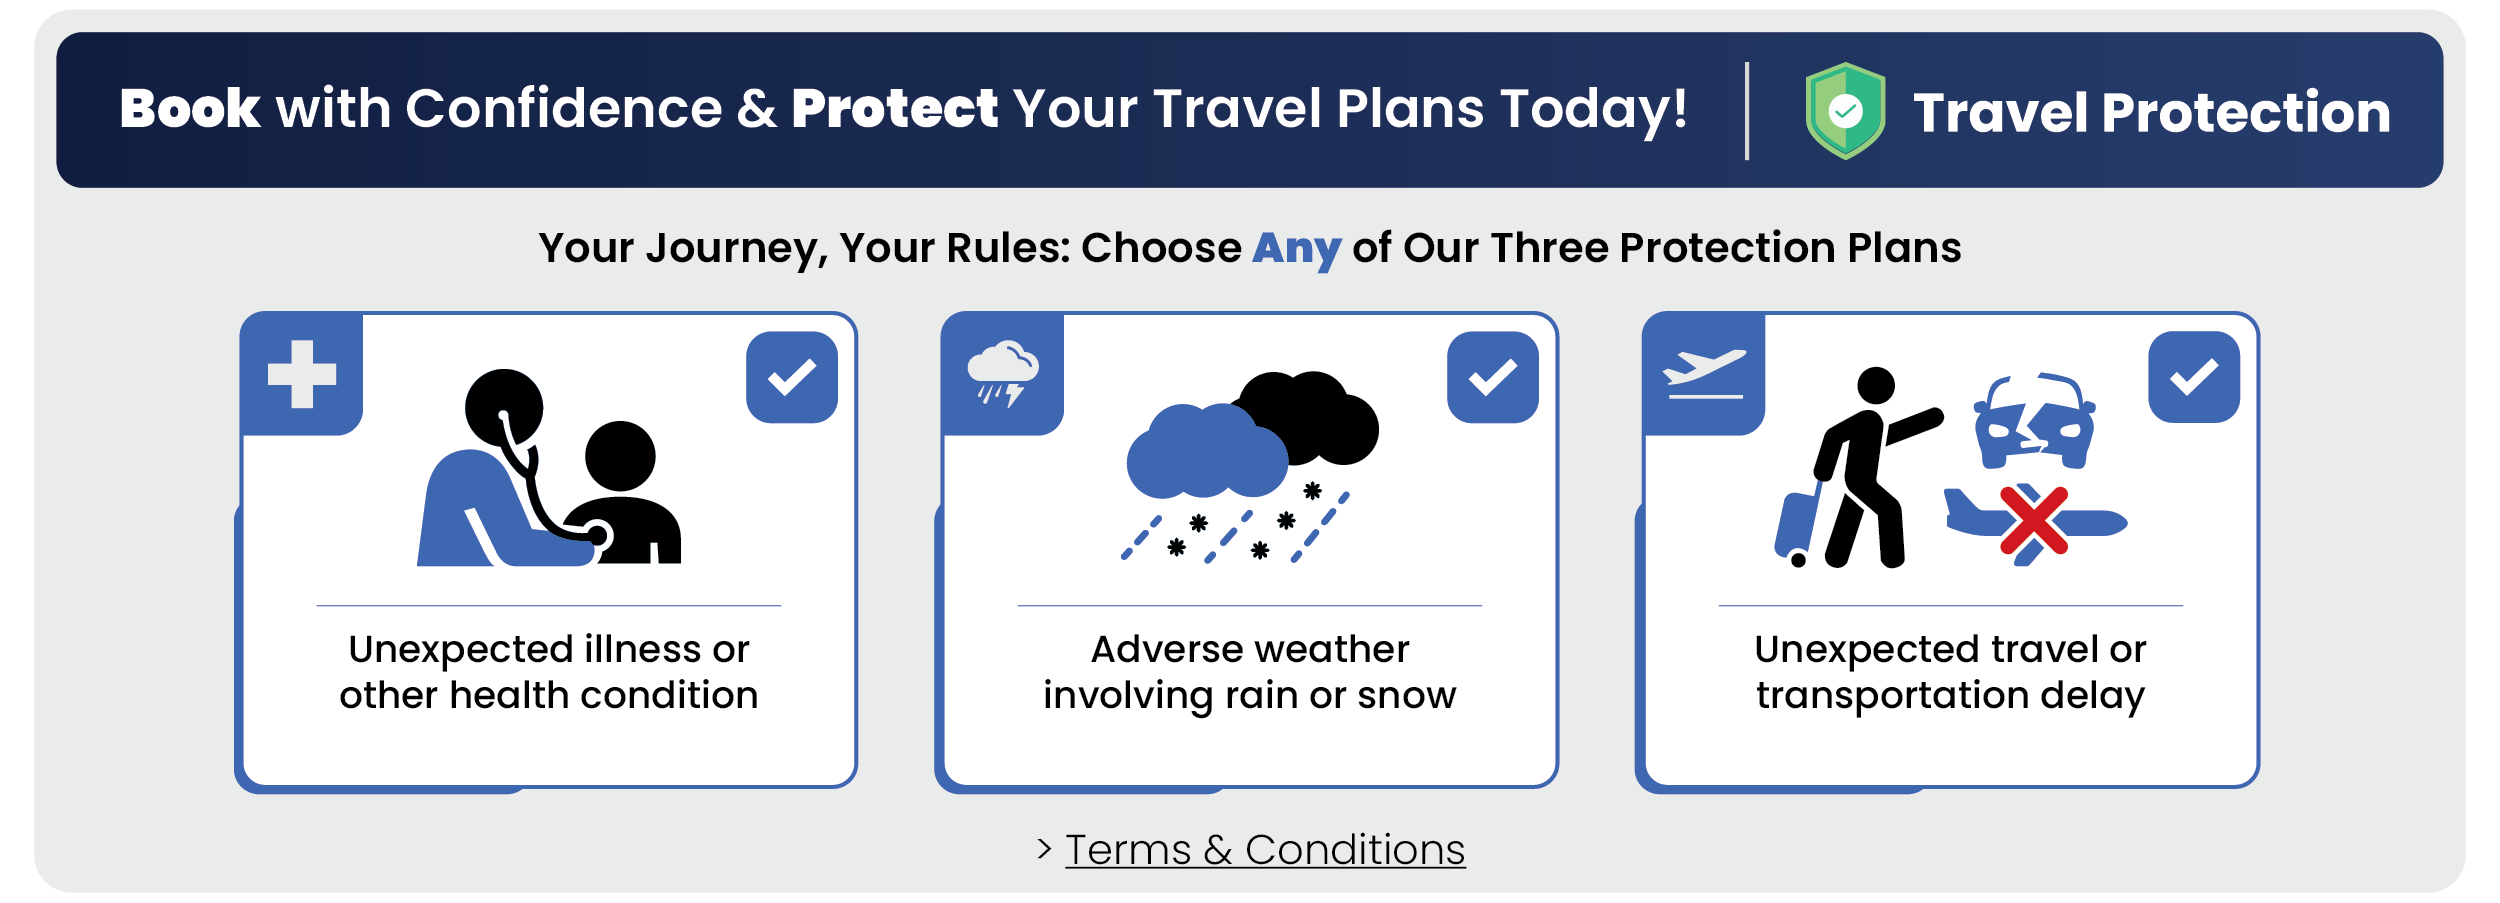 Options for travel protection